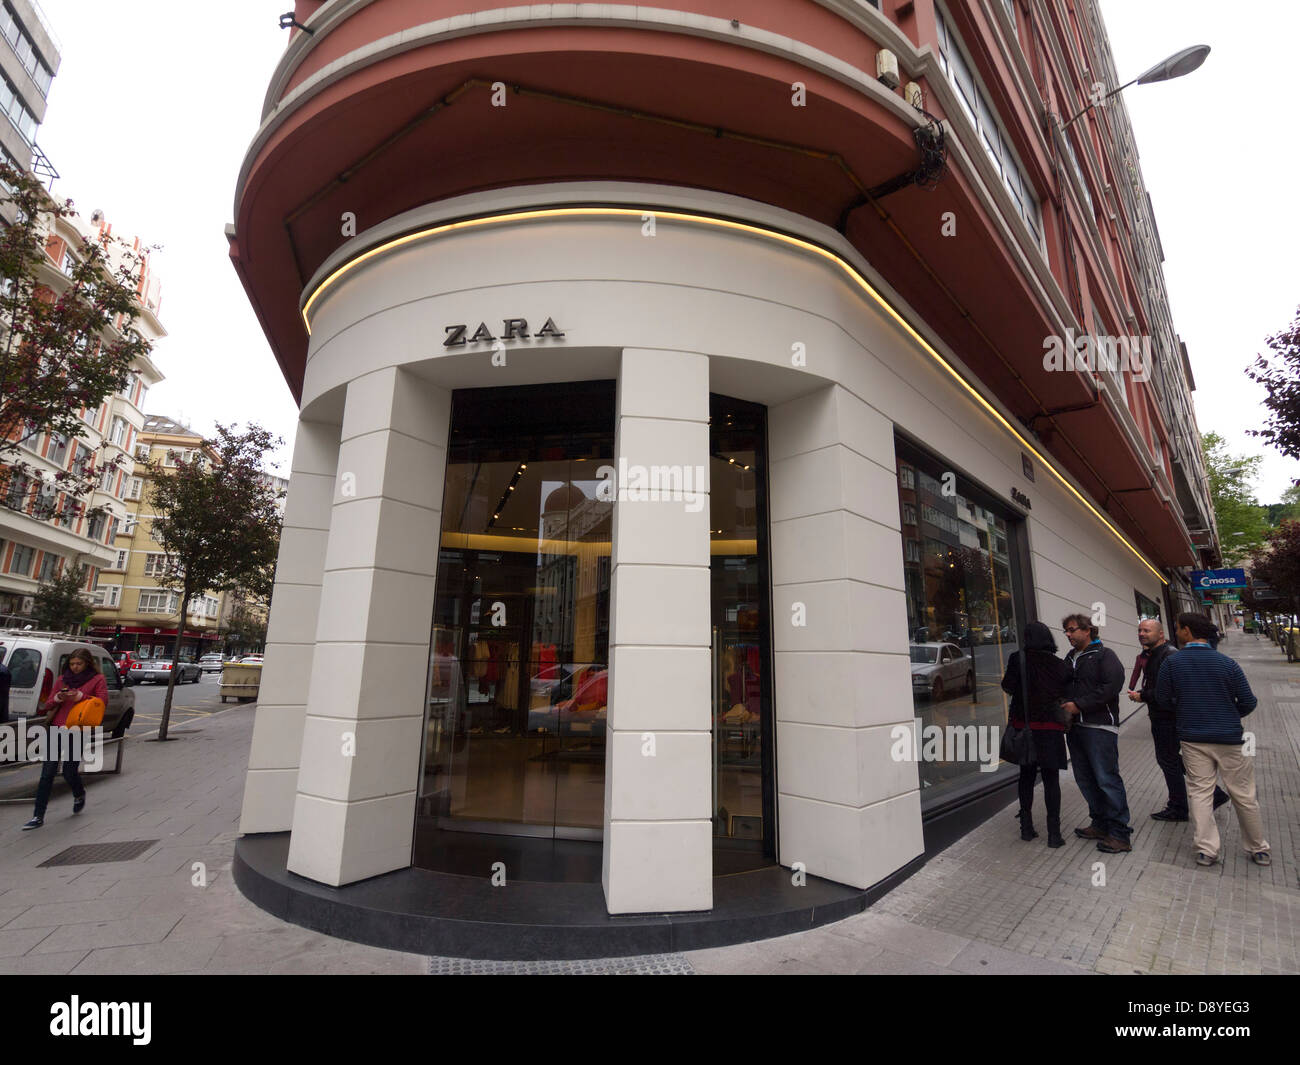 Building where the first Zara store in 